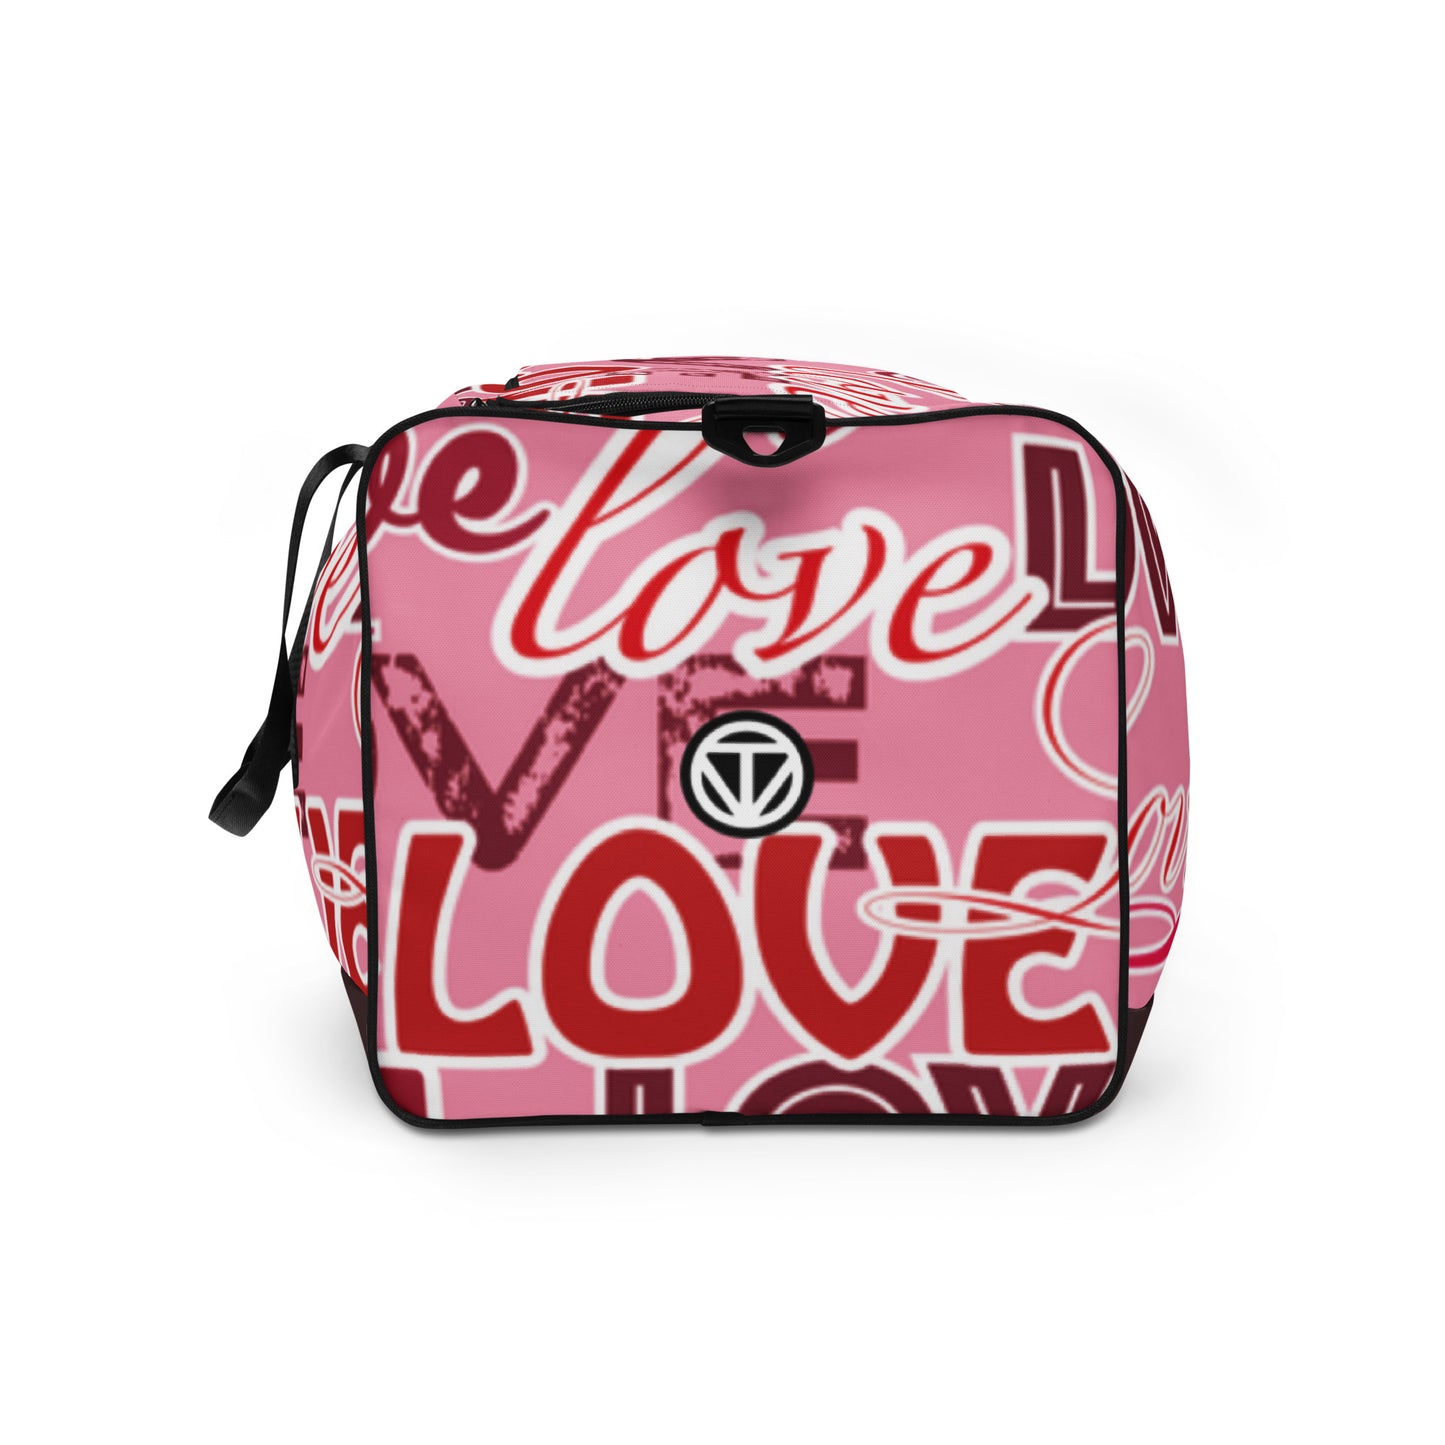 TIME OF VIBES - Travel Bag LOVE ONE - €109.00